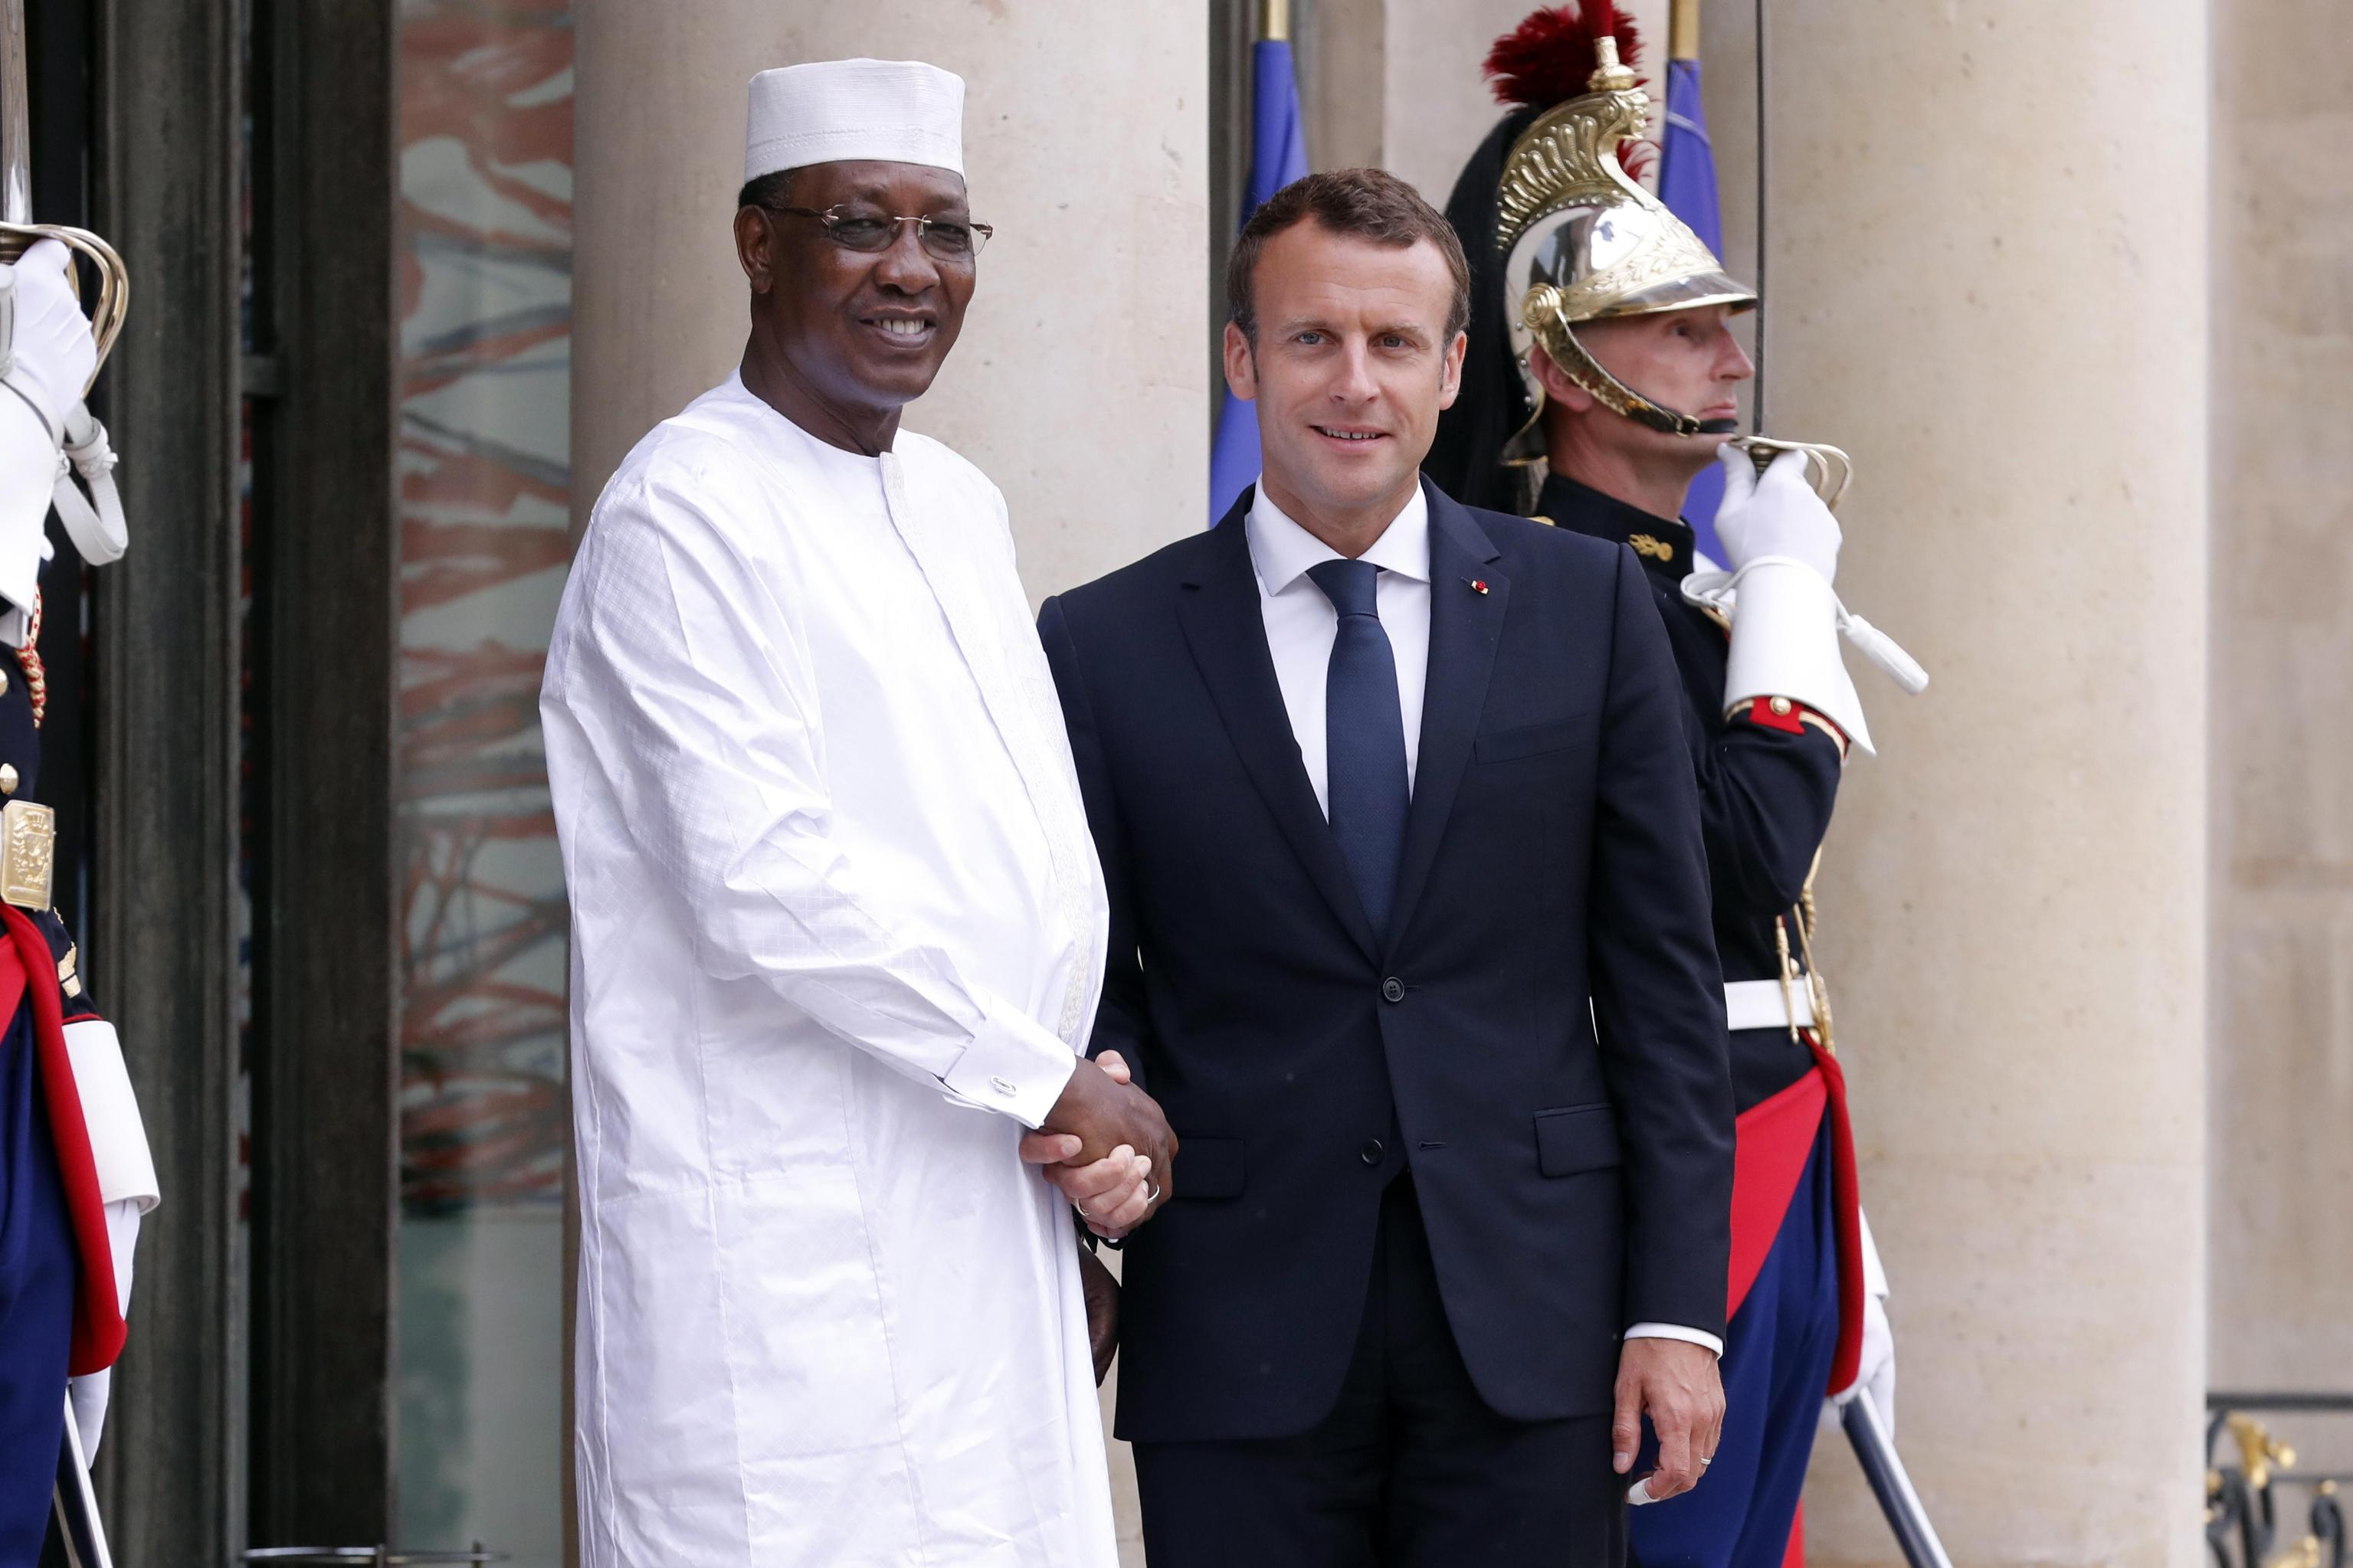 epa06770234 French President Emmanuel Macron (R) welcomes Chad President Idriss Deby (L), upon his arrival for the international congress on Libya, at the Elysee Palace in Paris, France, 29 May 2018.  EPA/ETIENNE LAURENT